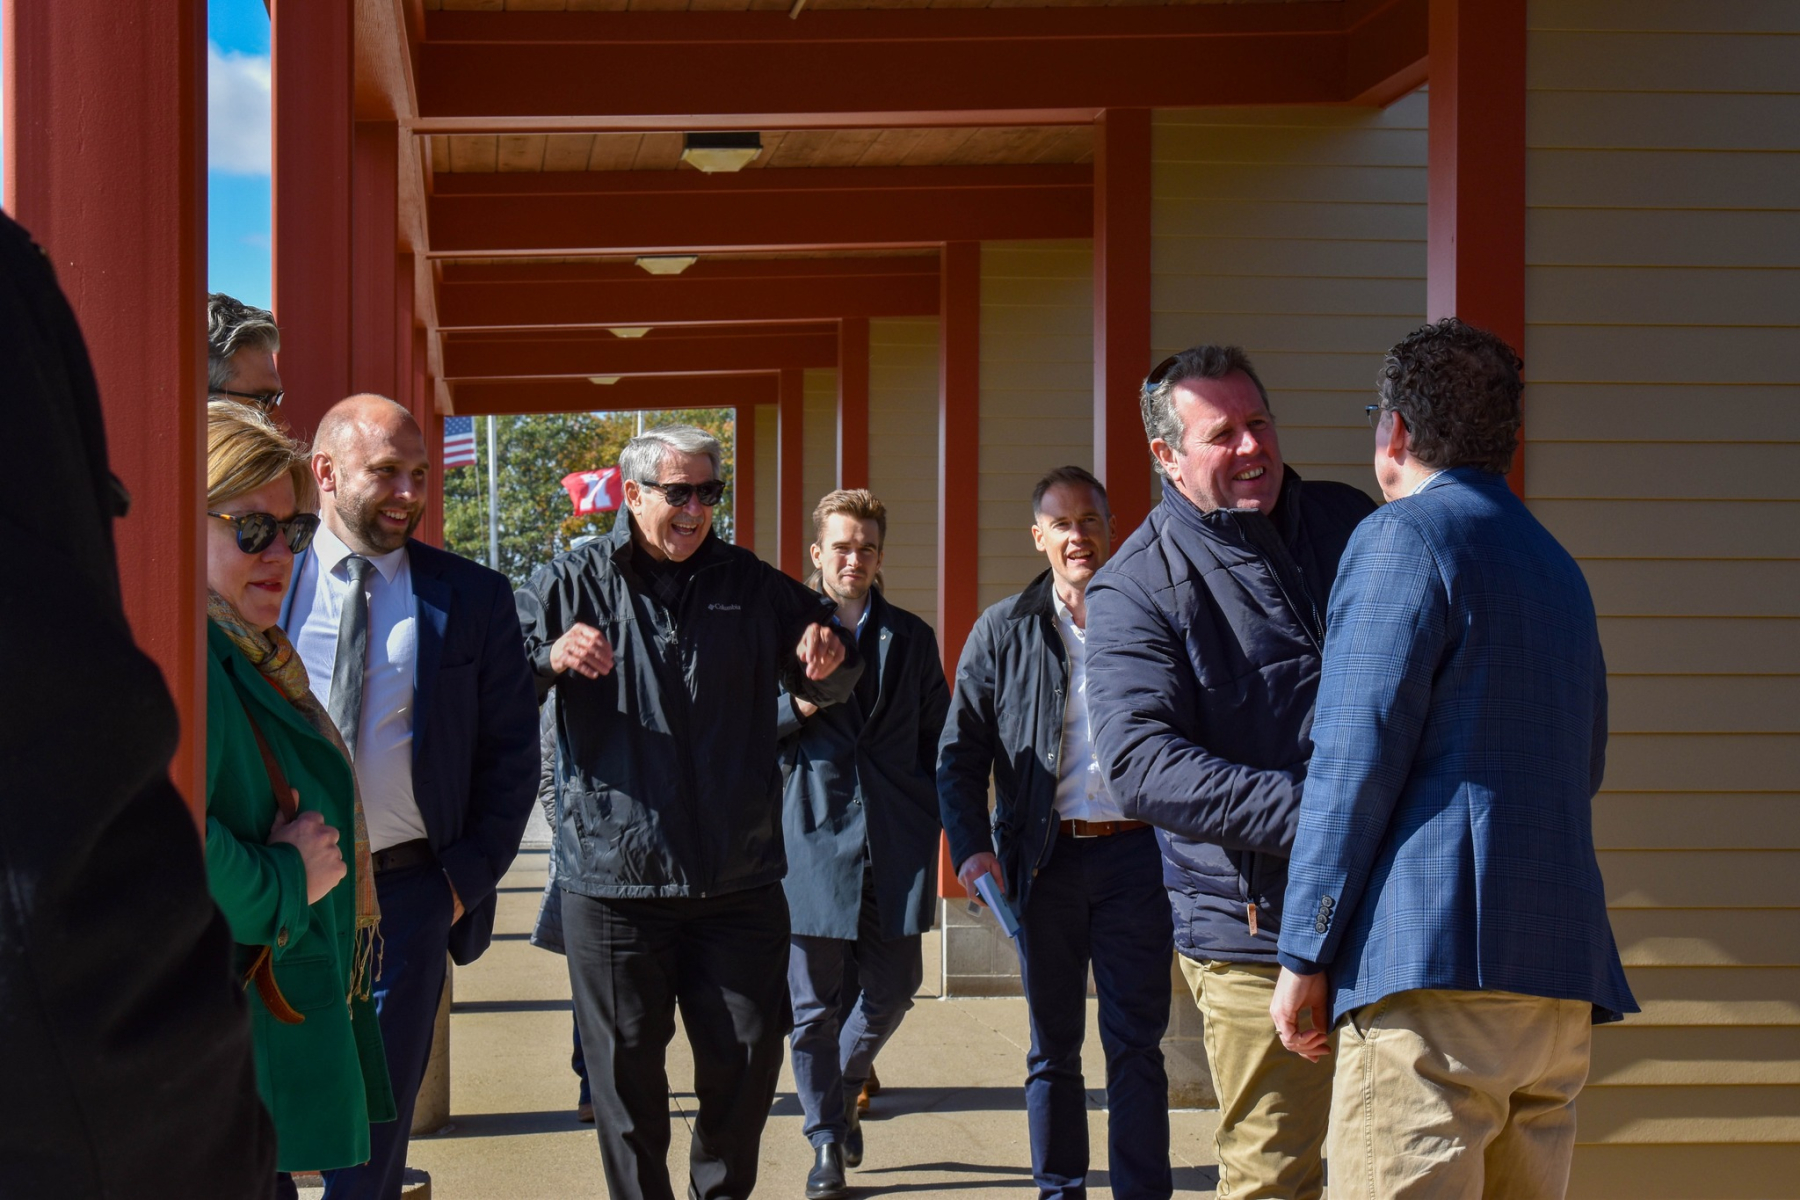 UK Minister For Food, Farming and Fisheries visit to ENREEC